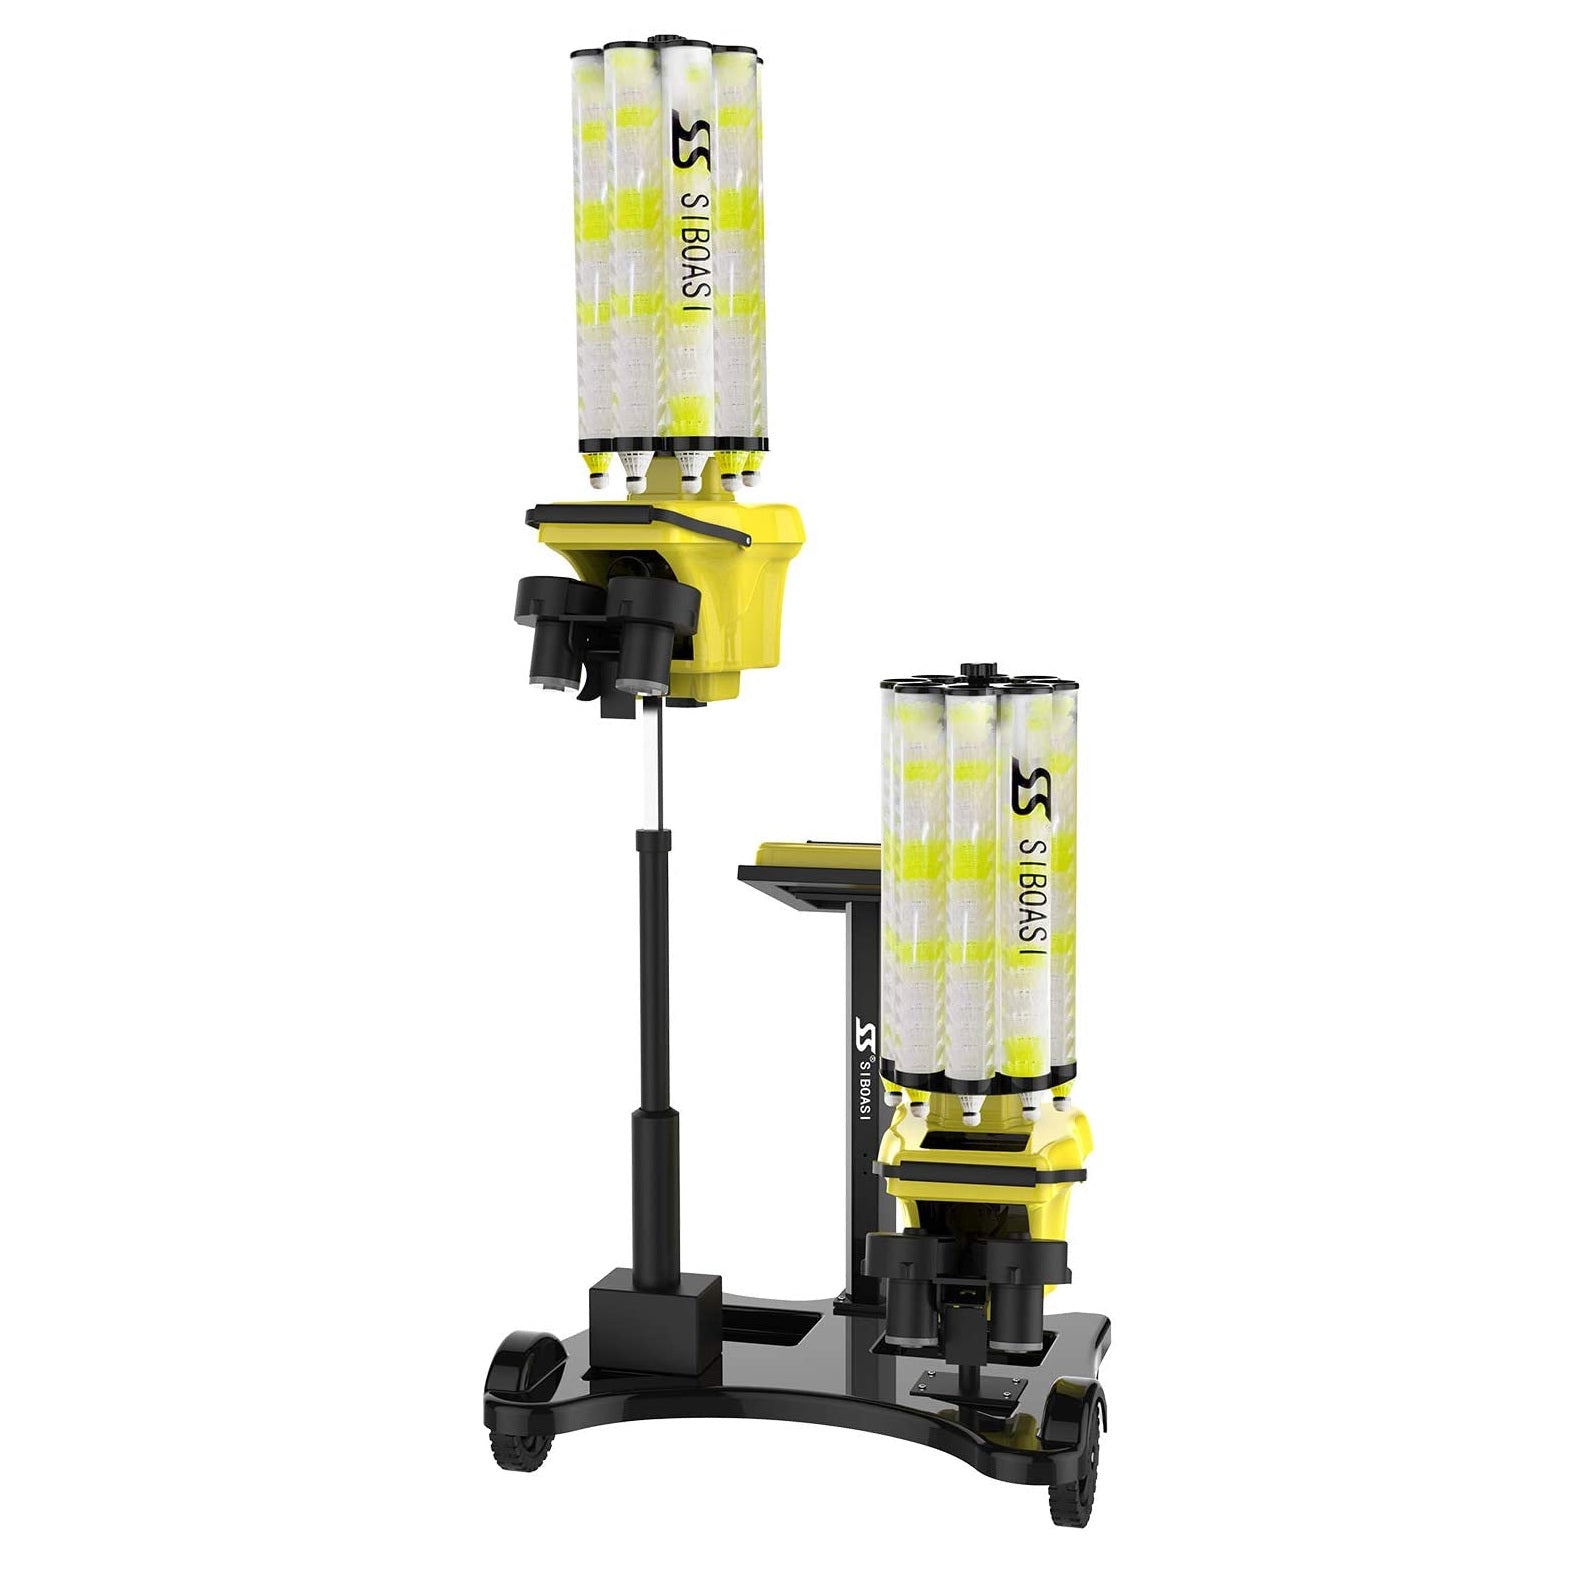 Siboasi Shuttlecock Training Machine with Two Heads for Professional Training S8025